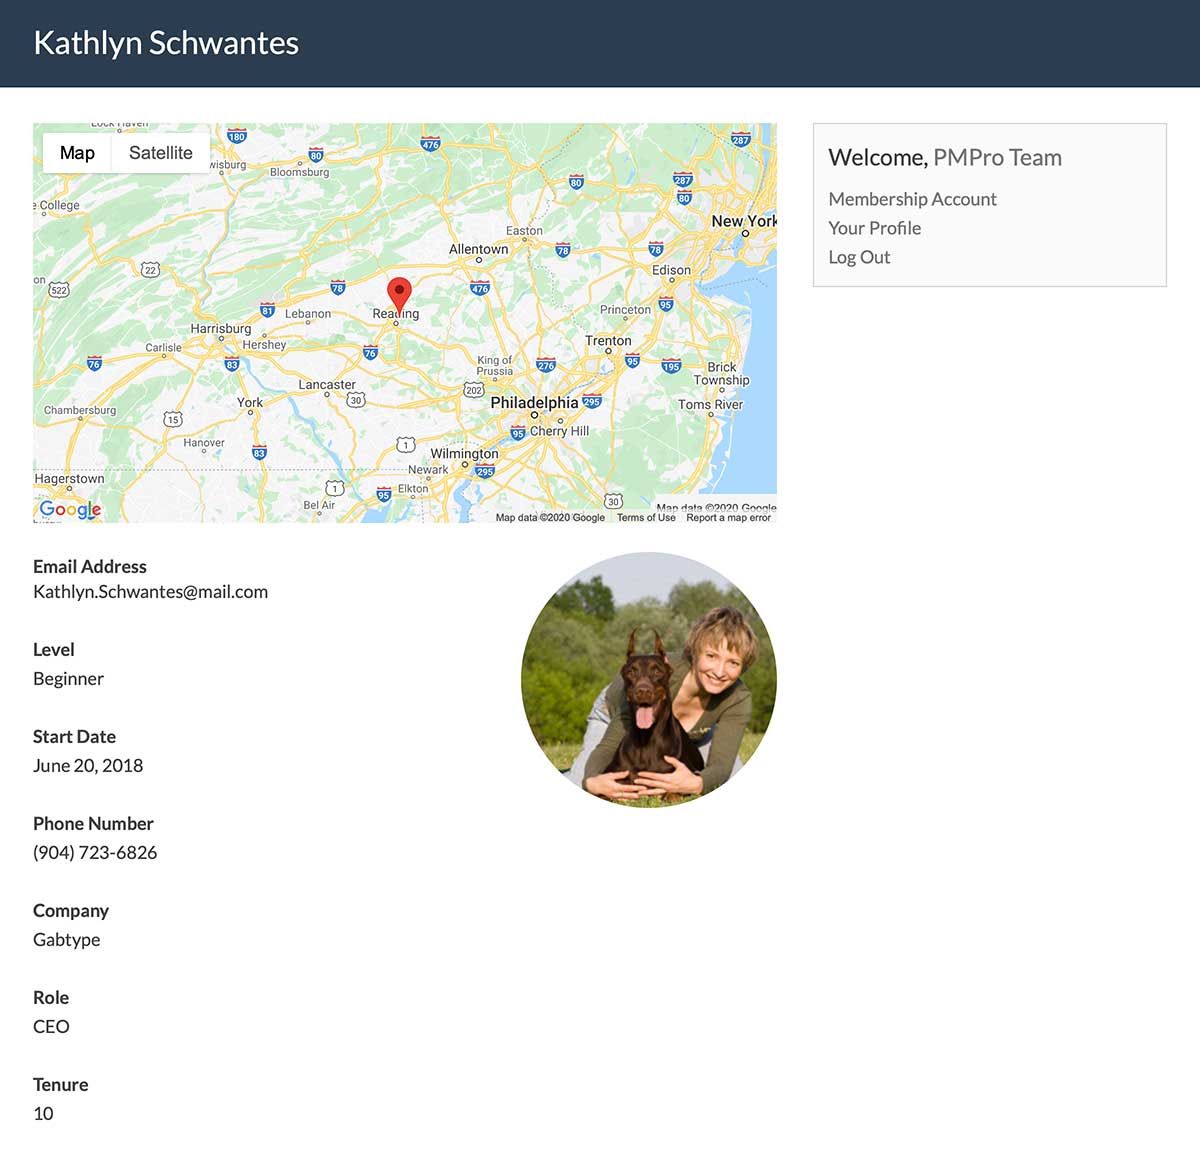 Membership Map on a single Member Profile frontend page